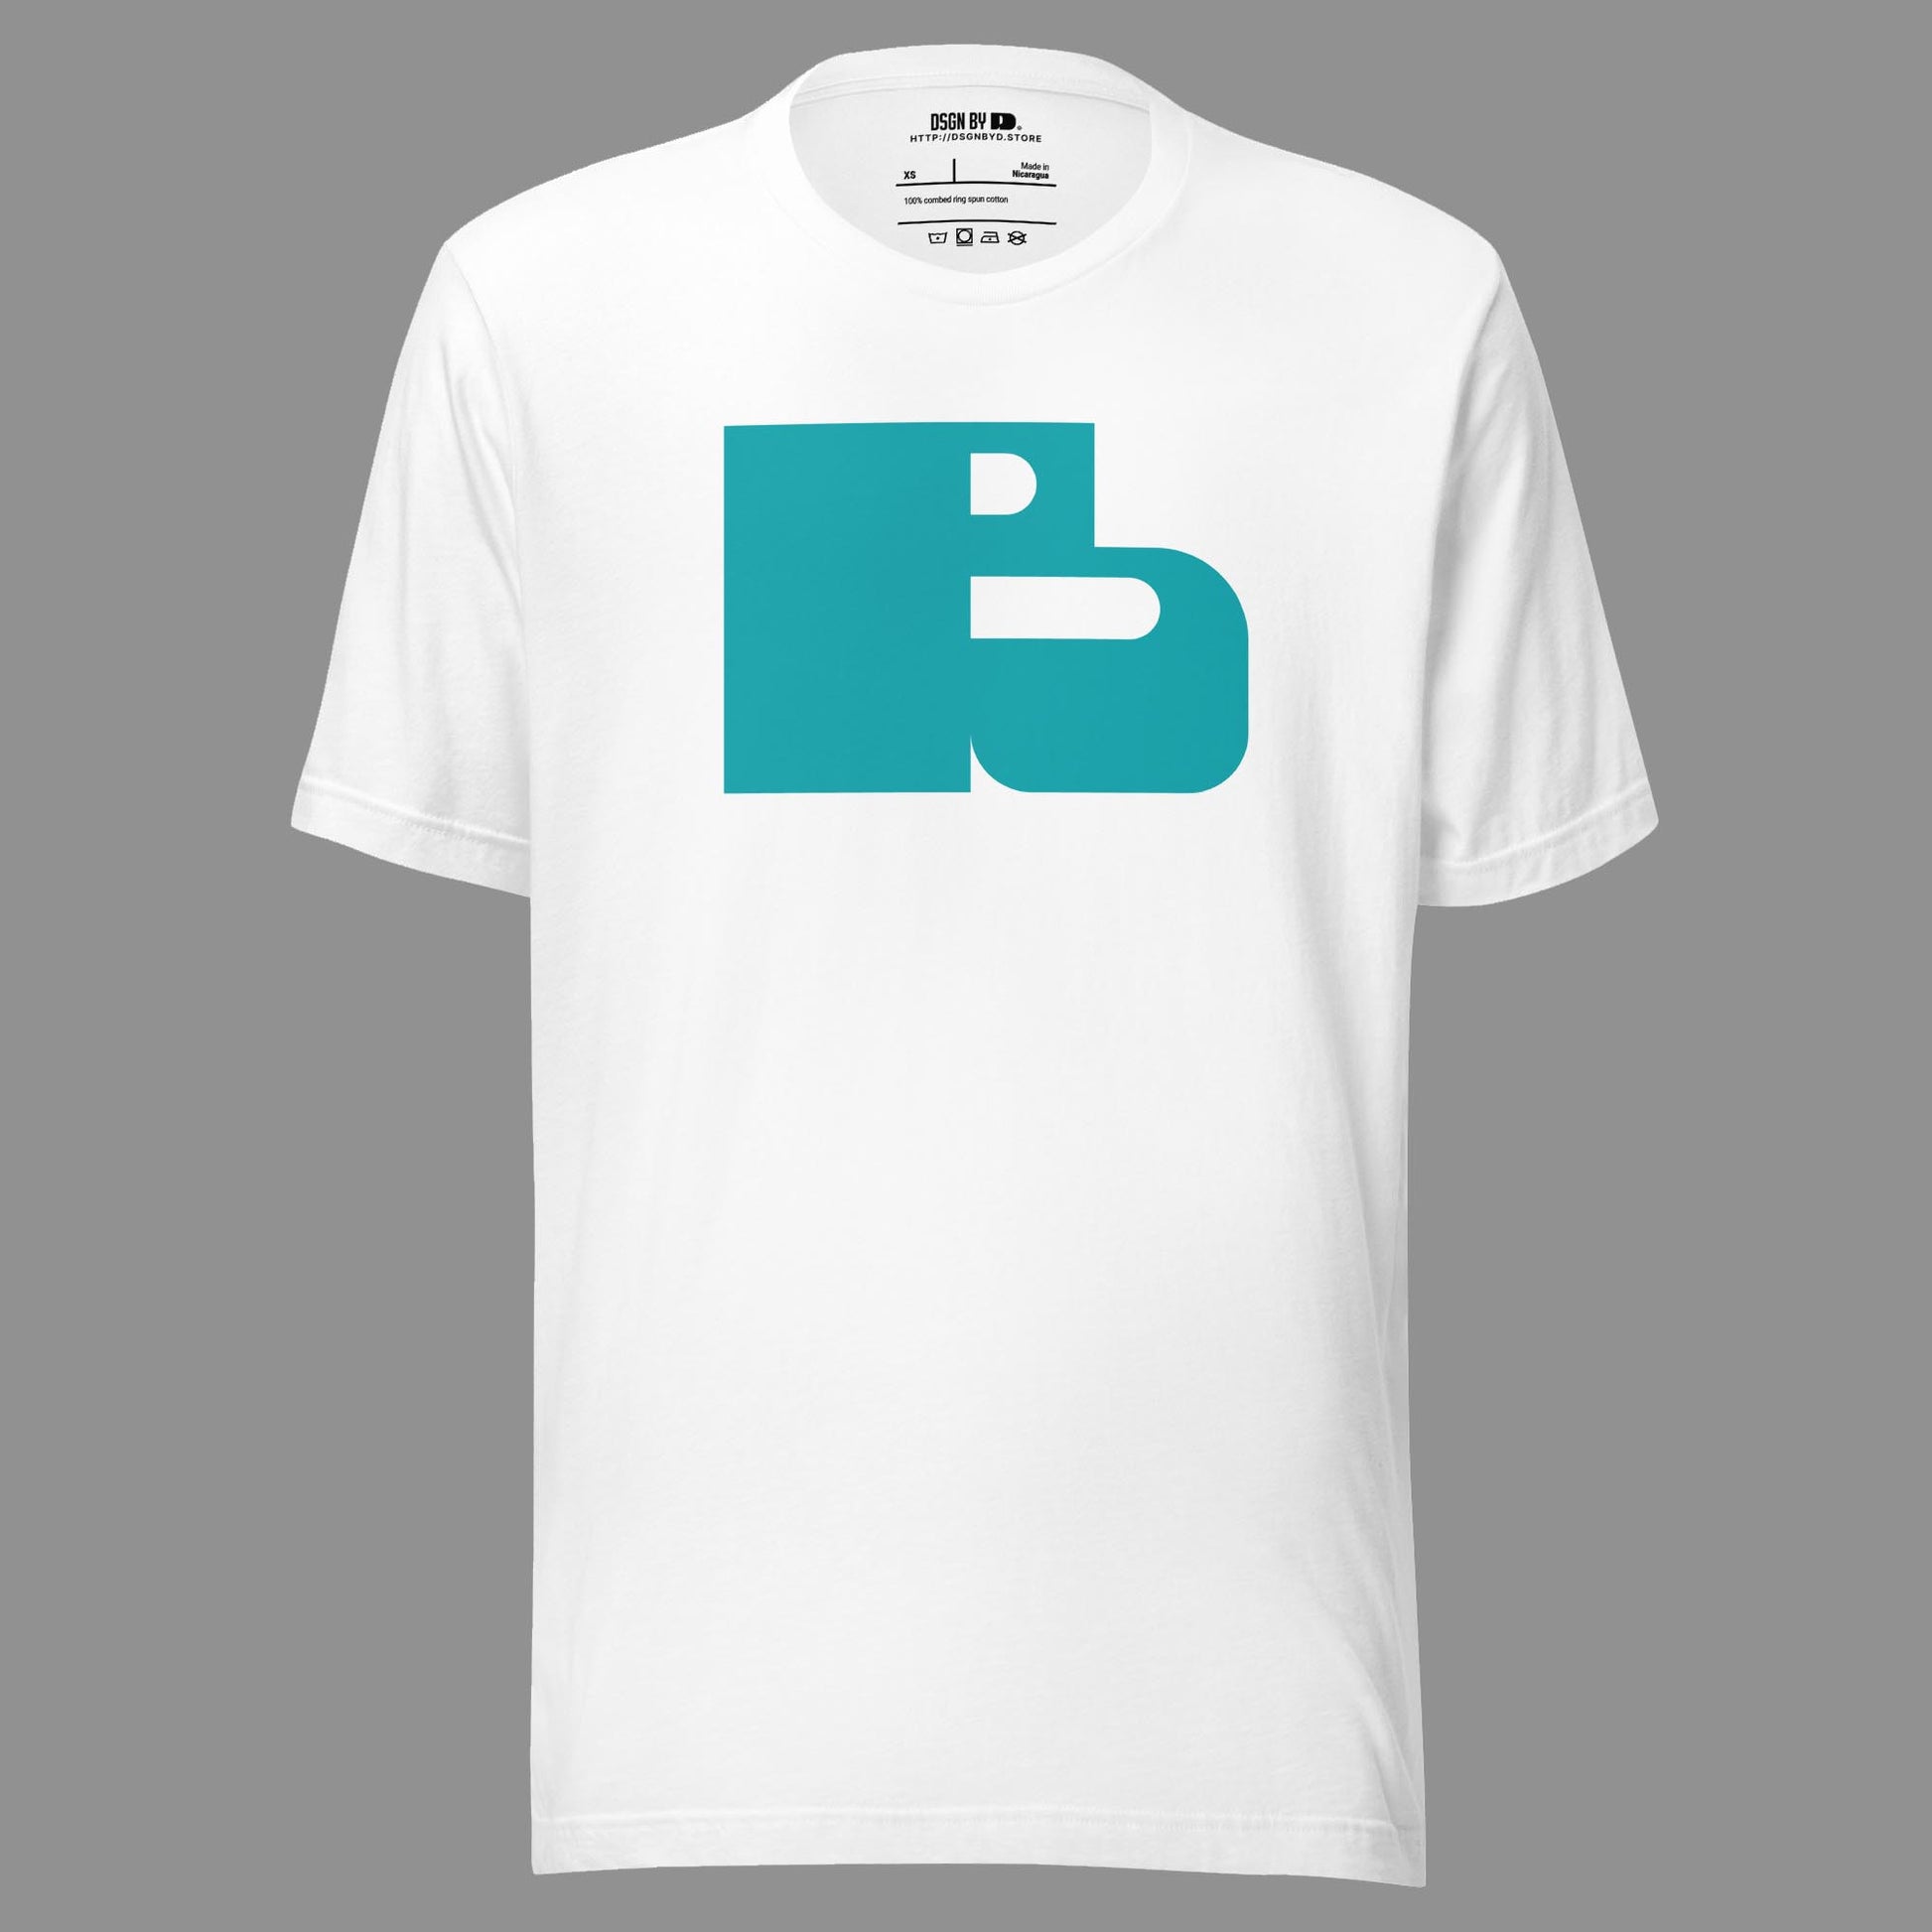 A white cotton unisex graphic tee with letter B.